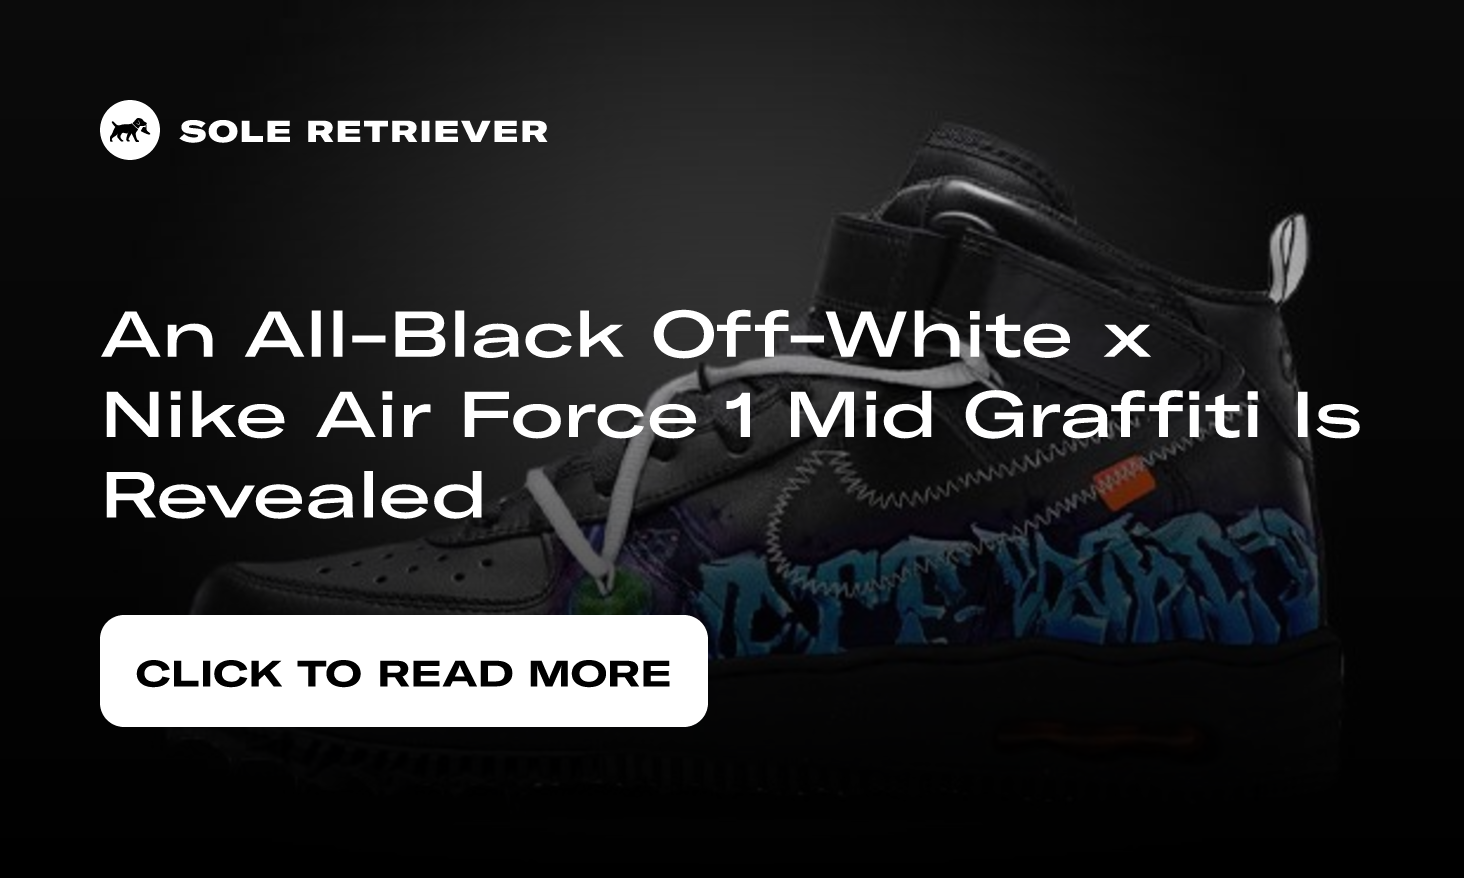 An All-Black Off-White x Nike Air Force 1 Mid Graffiti Is Revealed